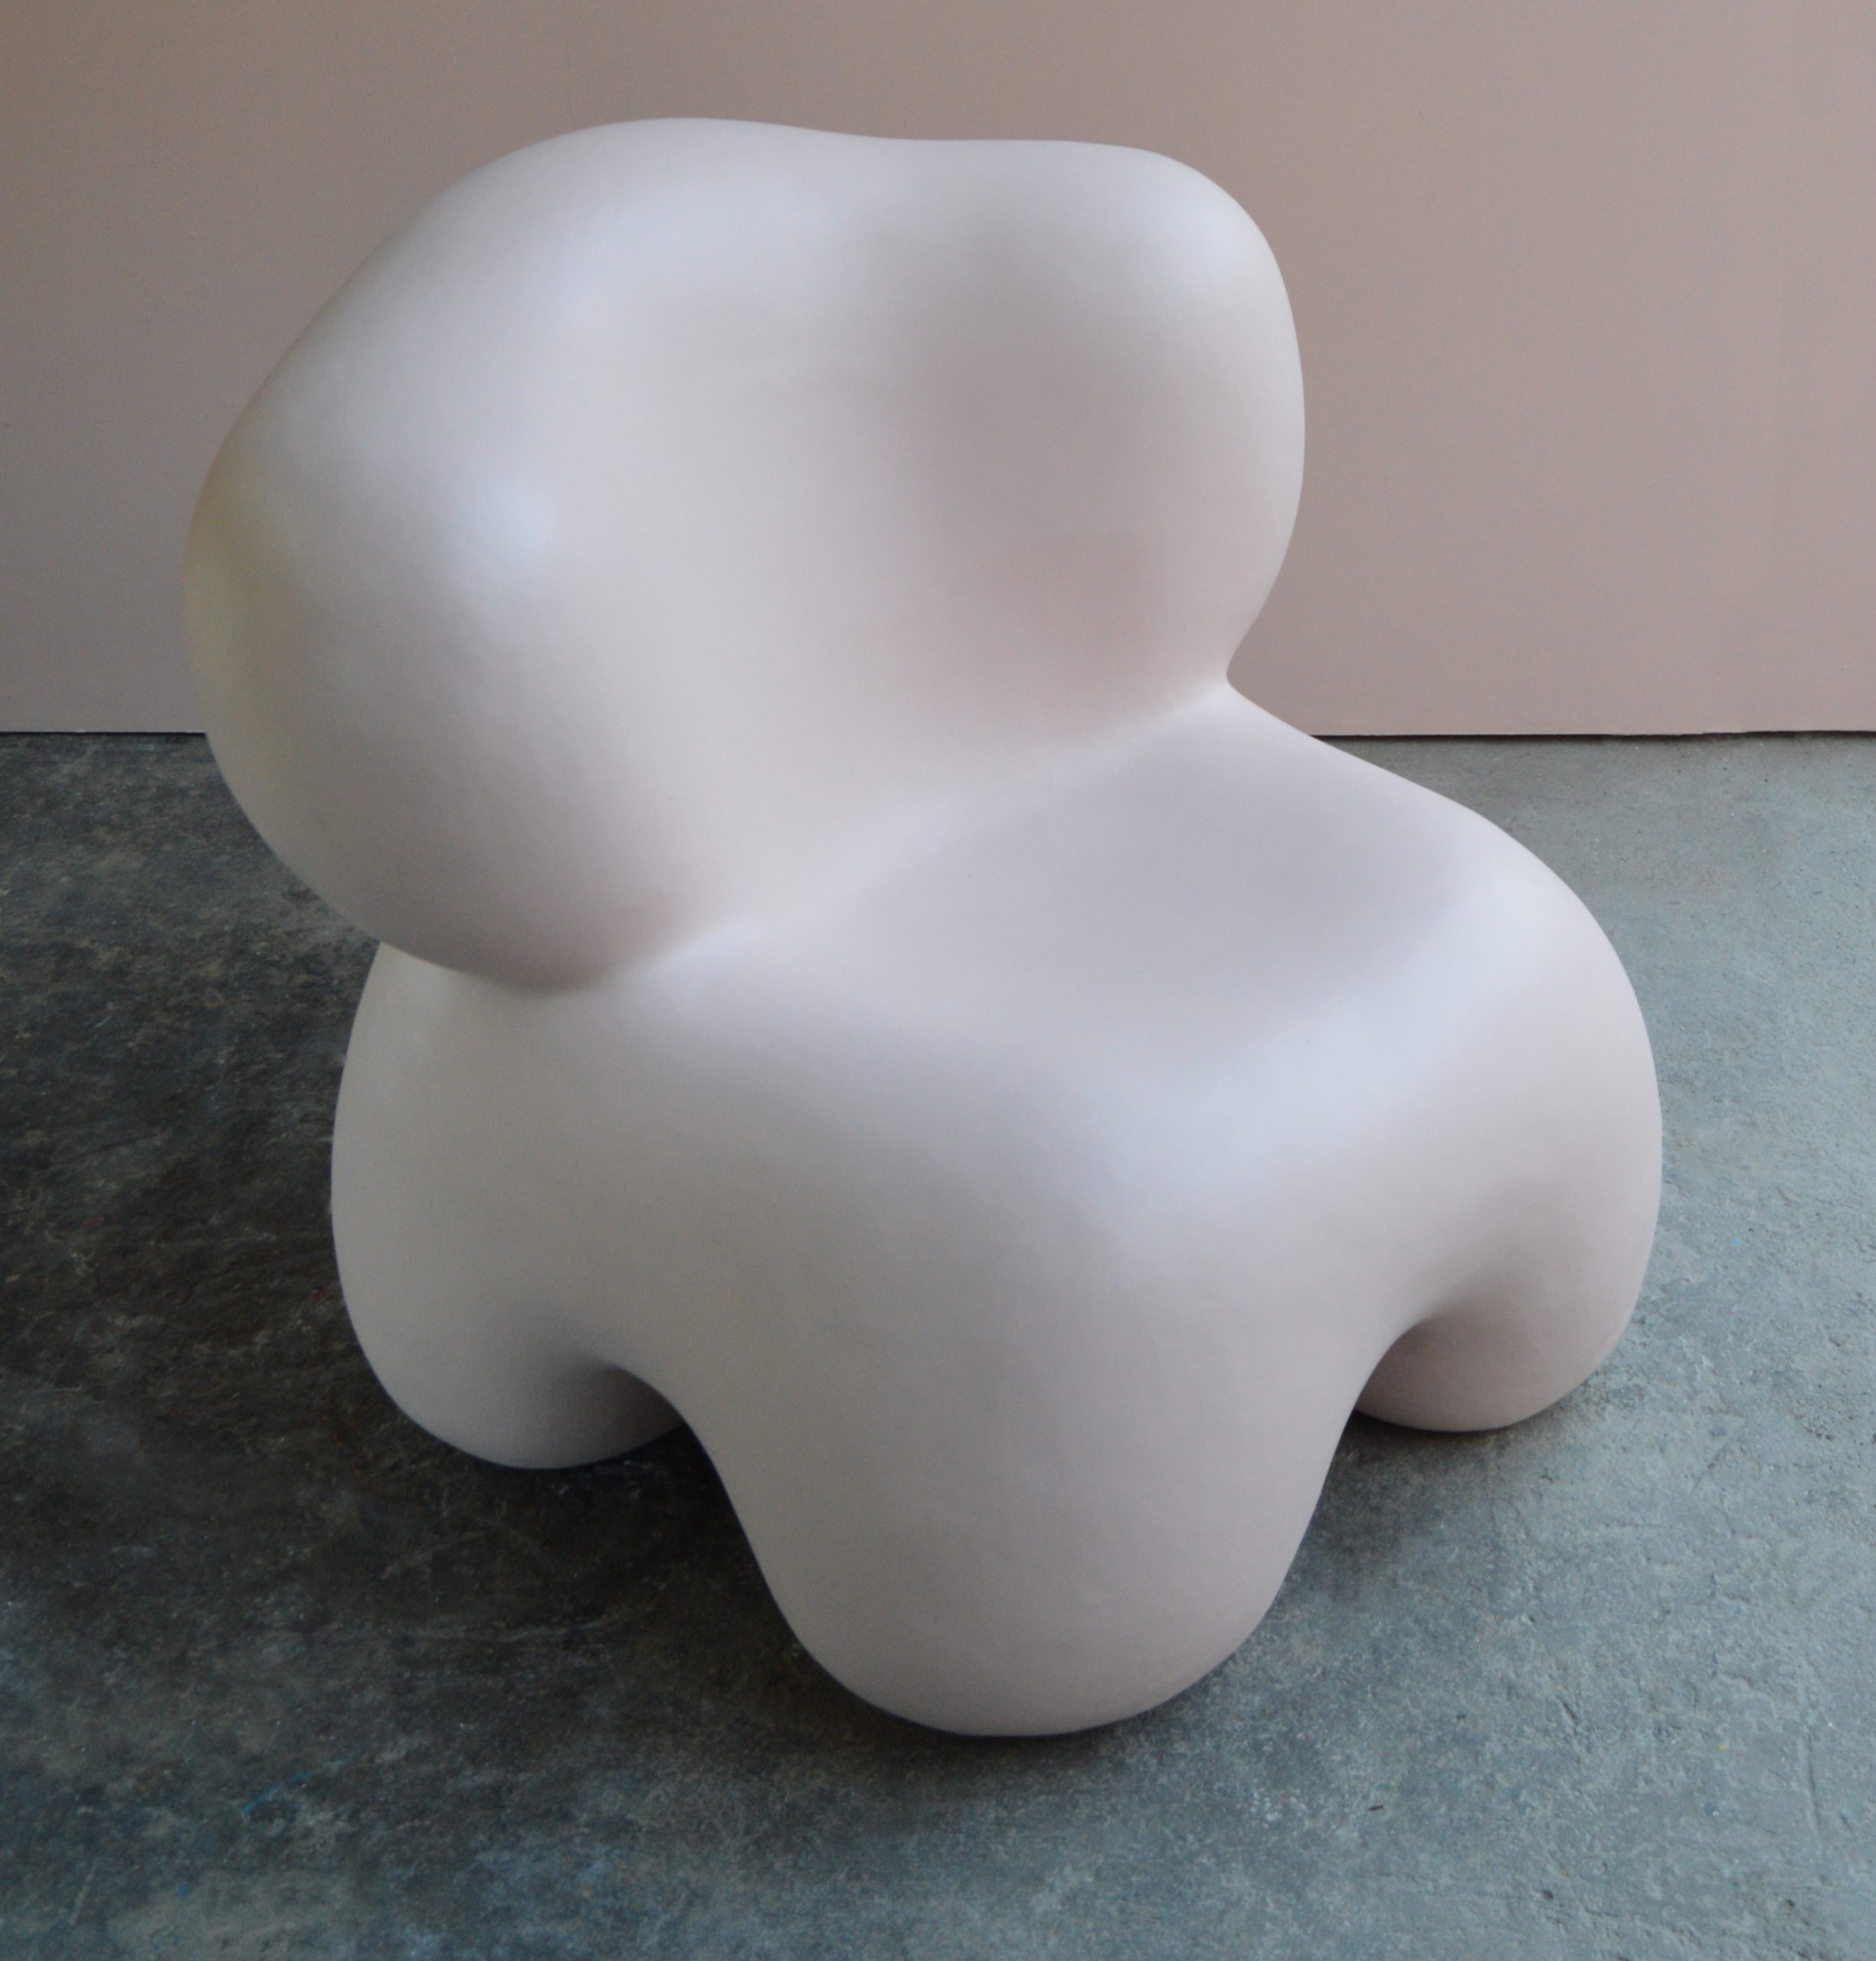 A chubby pink chair by Noon Studio